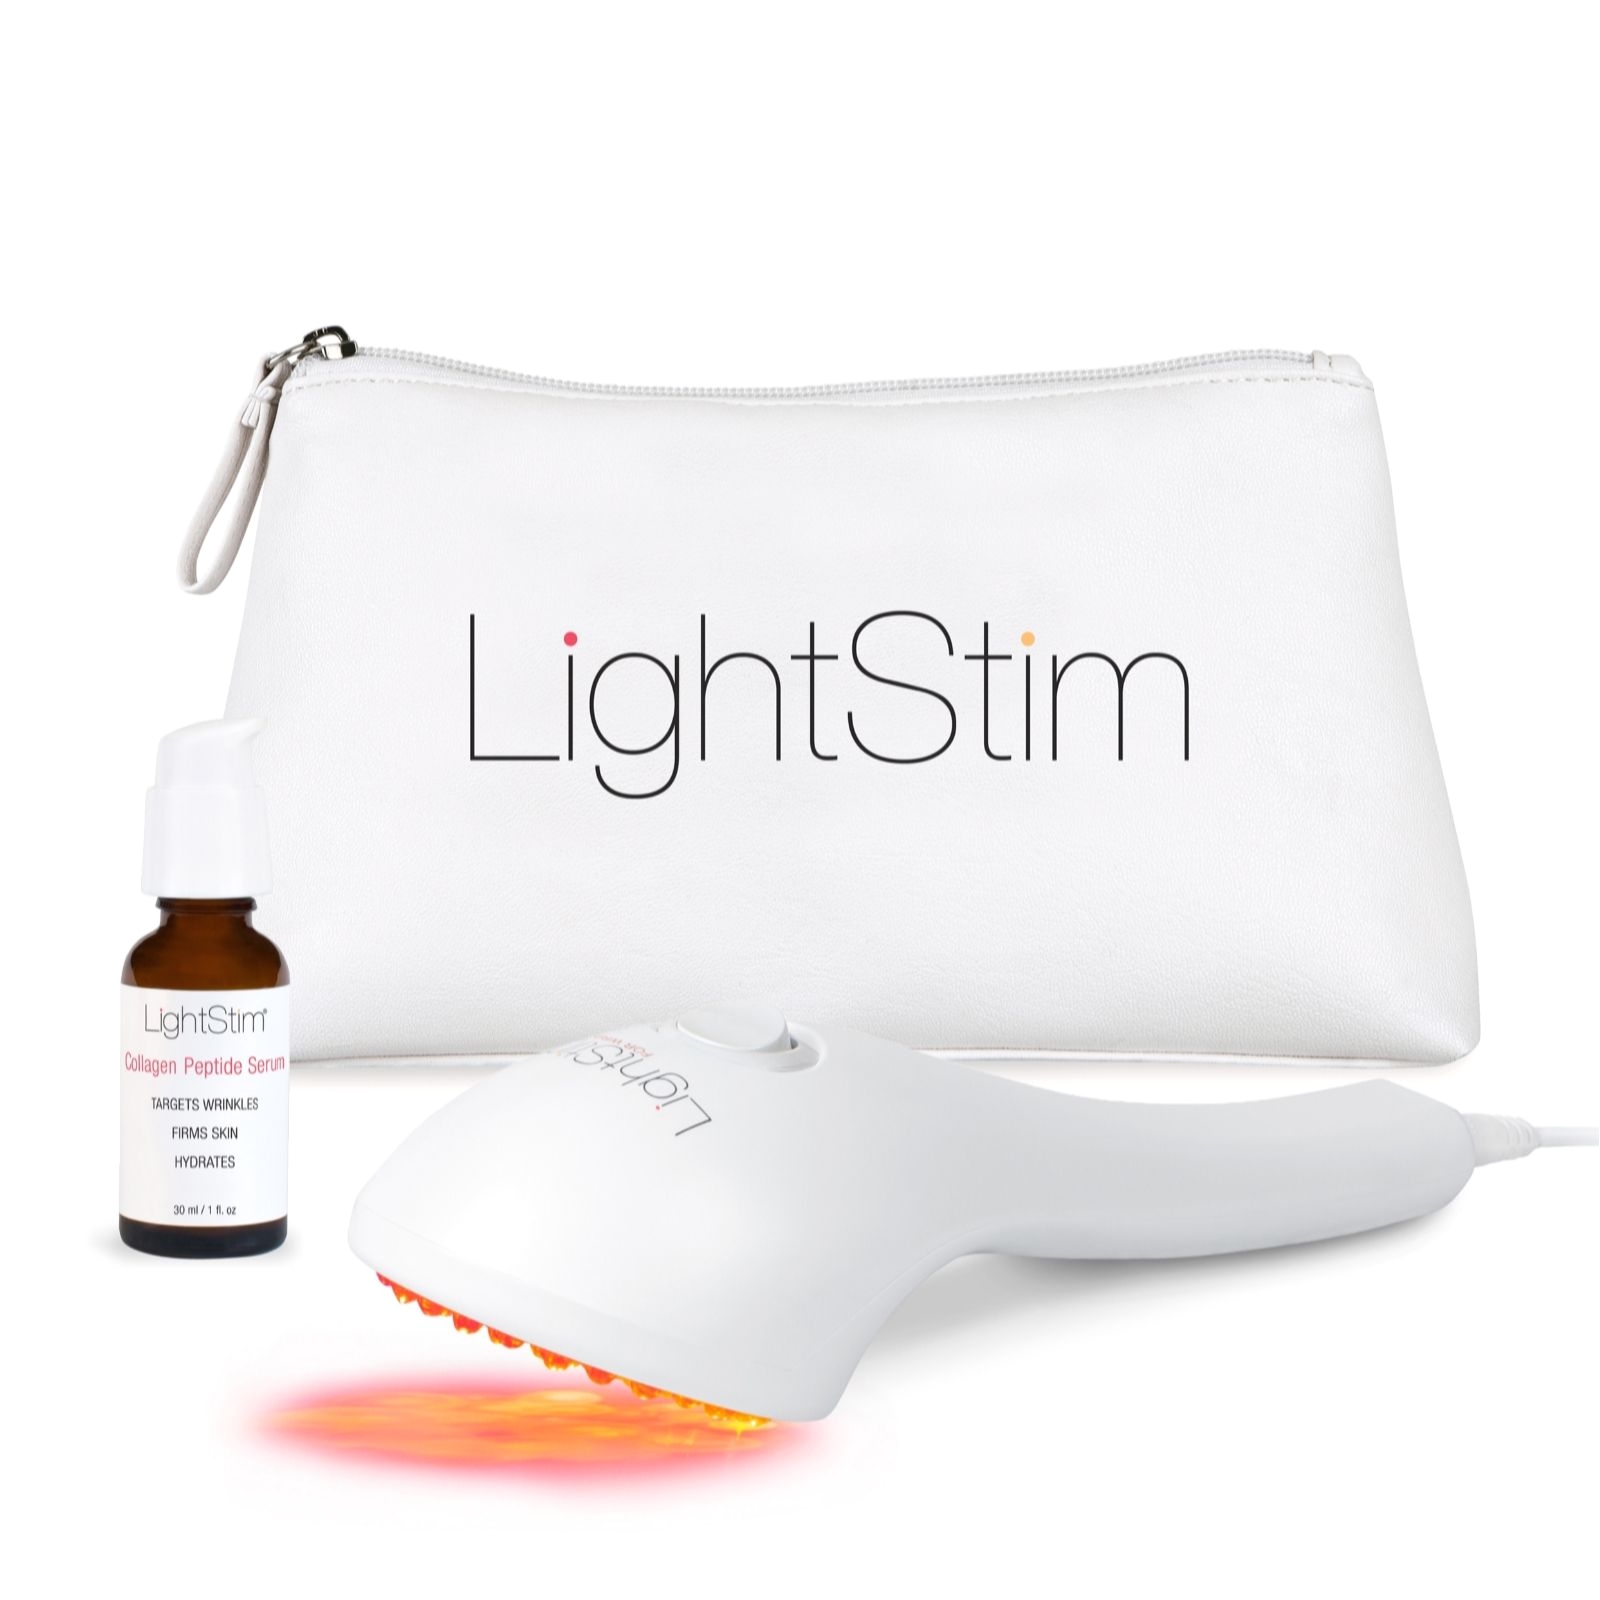 lightstim led light device for full face wrinkles with timer page 1 qvc uk